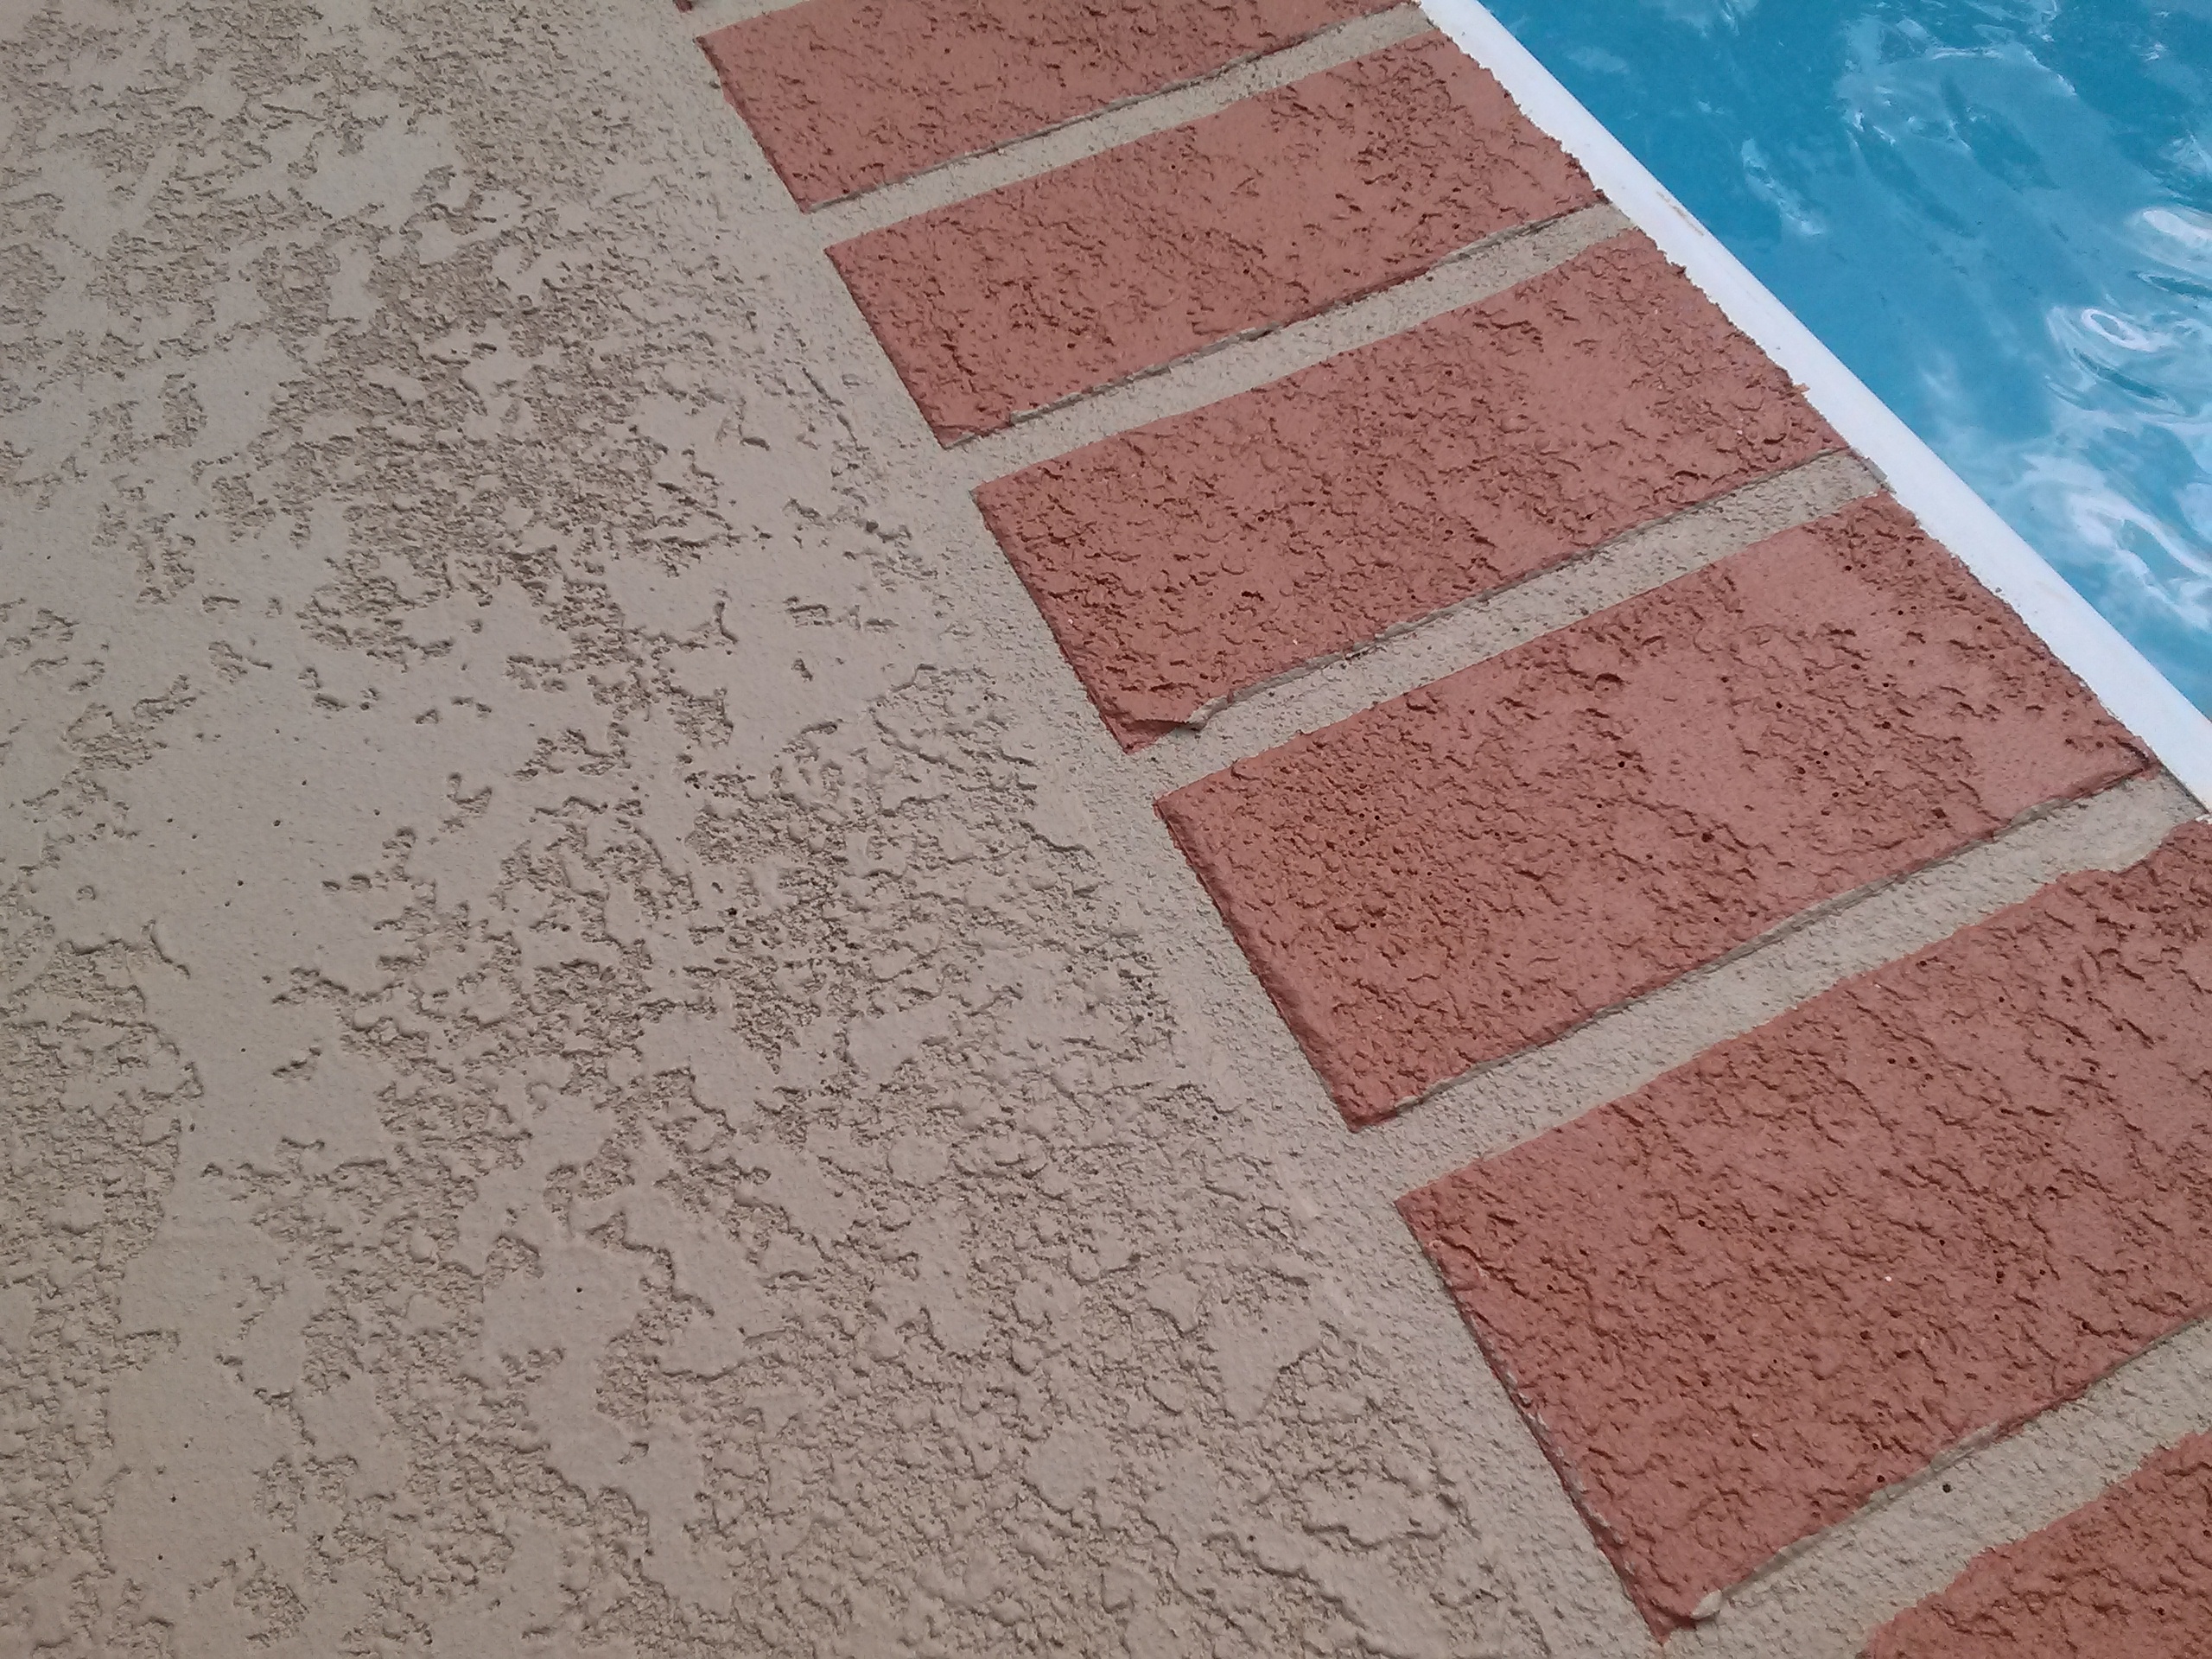 New Deck Coating with Brick Pattern